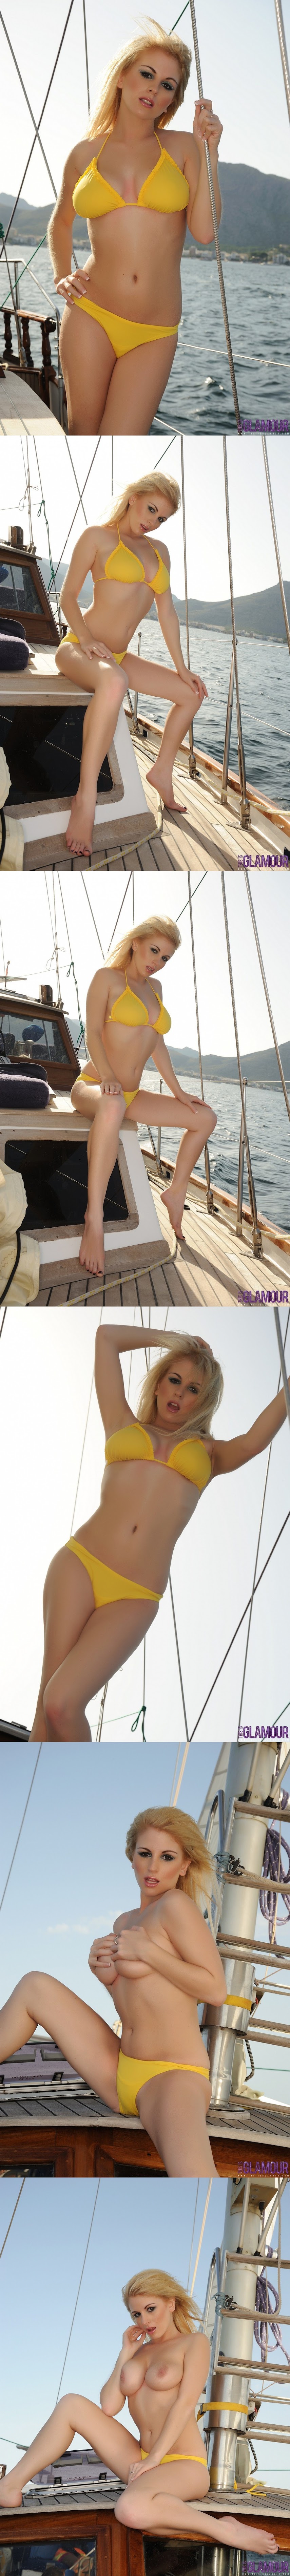 Zoe_Stollery_And_Amy_Lu_Bare_Their_Essentials.zip-jk- Zoe Stollery Sets Sail In A Canary Yellow Bikini